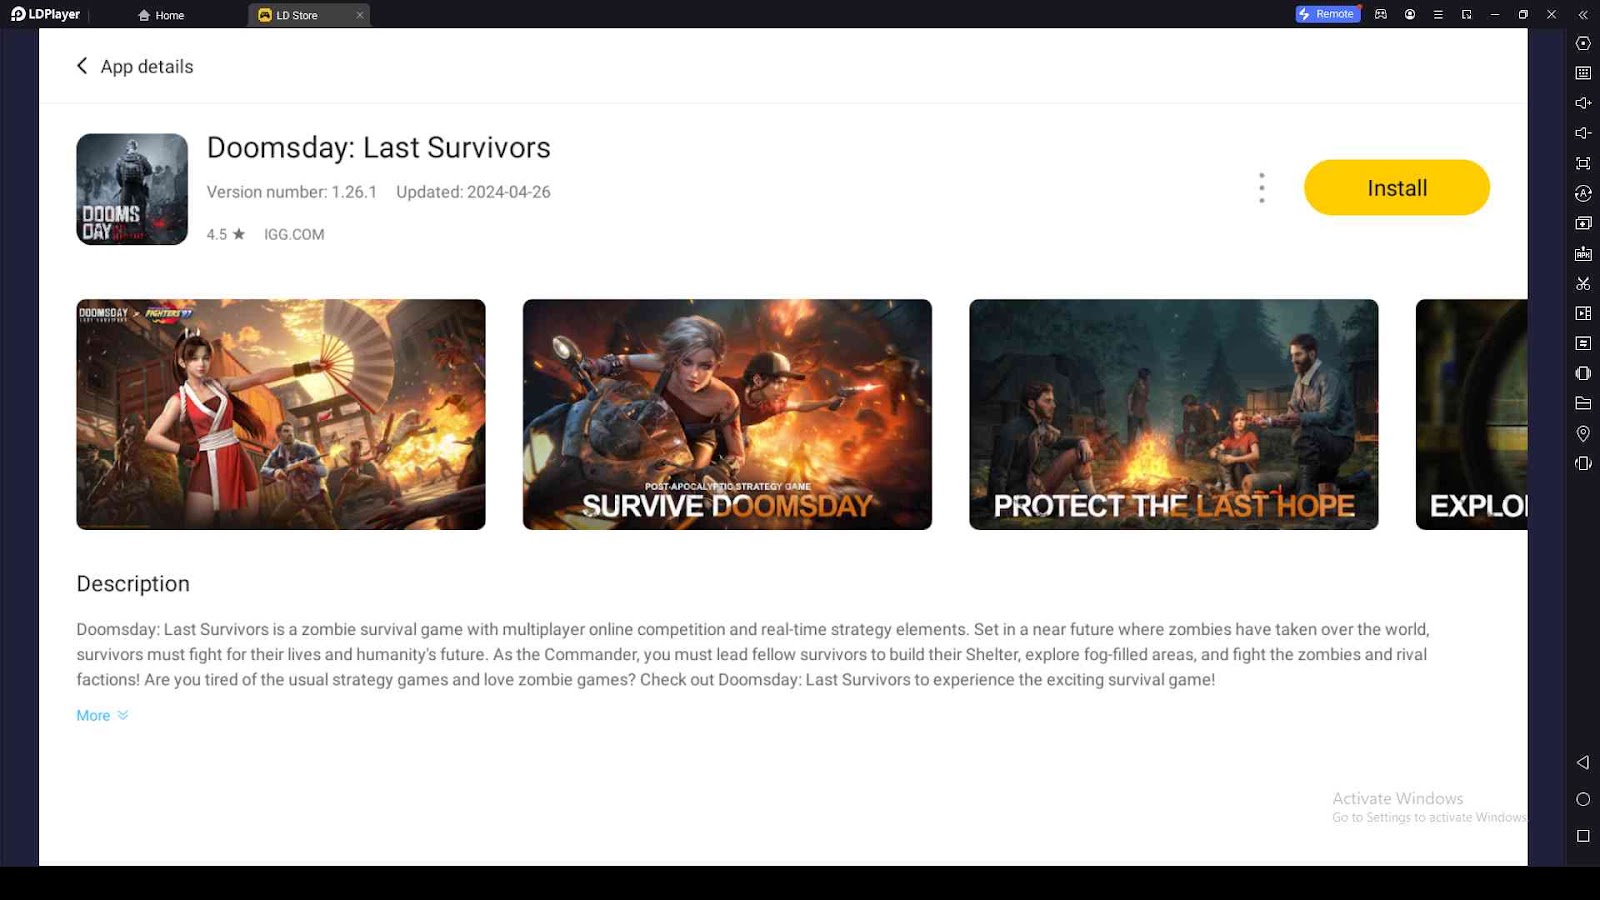 Playing Doomsday: Last Survivors on PC with LDPlayer